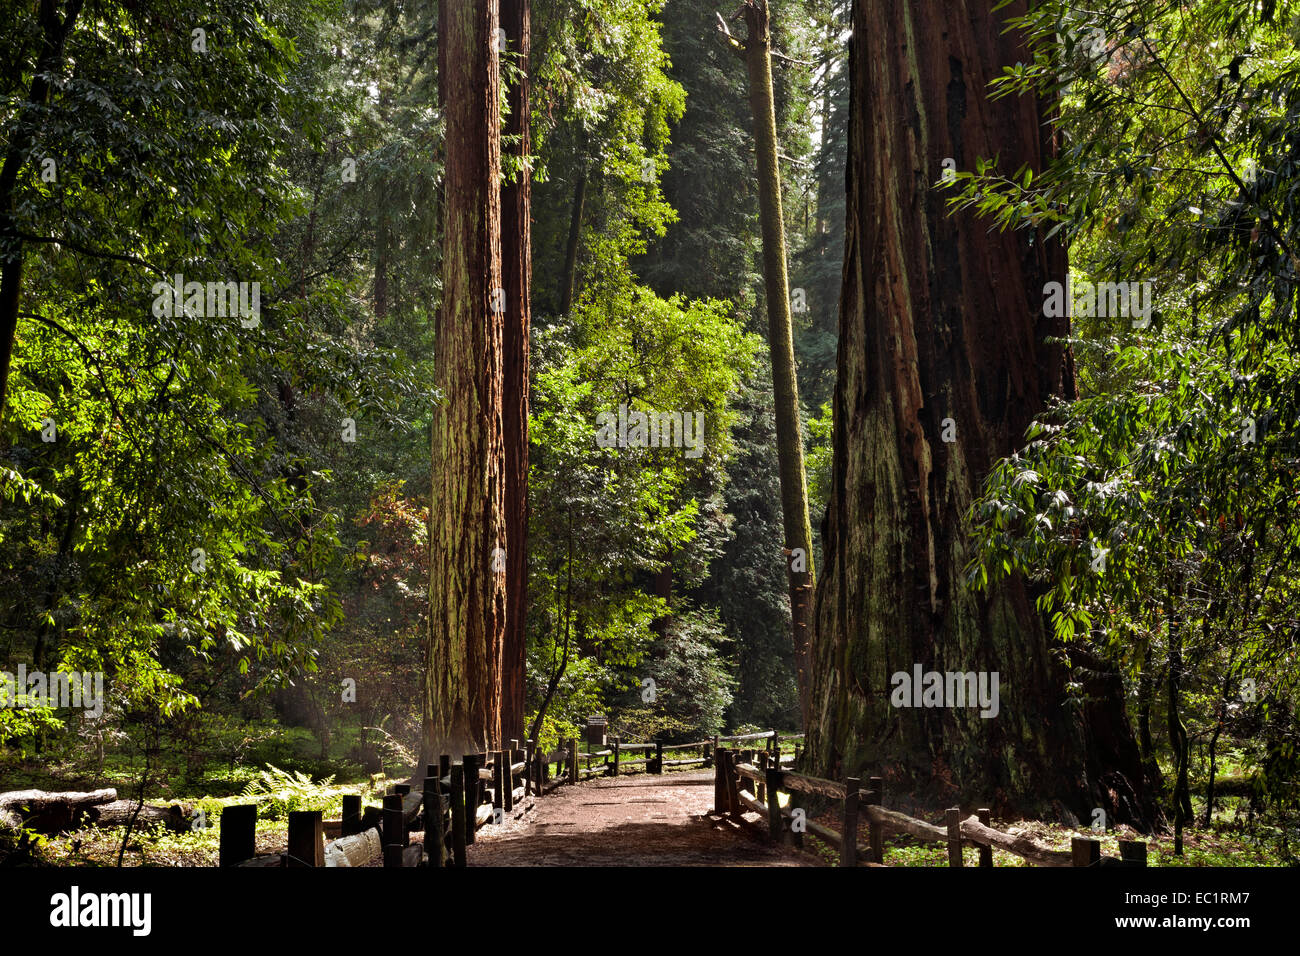 CA02451-00...CALIFORNIA - Redwood alberi lungo il Redwood Grove Loop Trail in Henry Cowell Redwoods State Park. Foto Stock